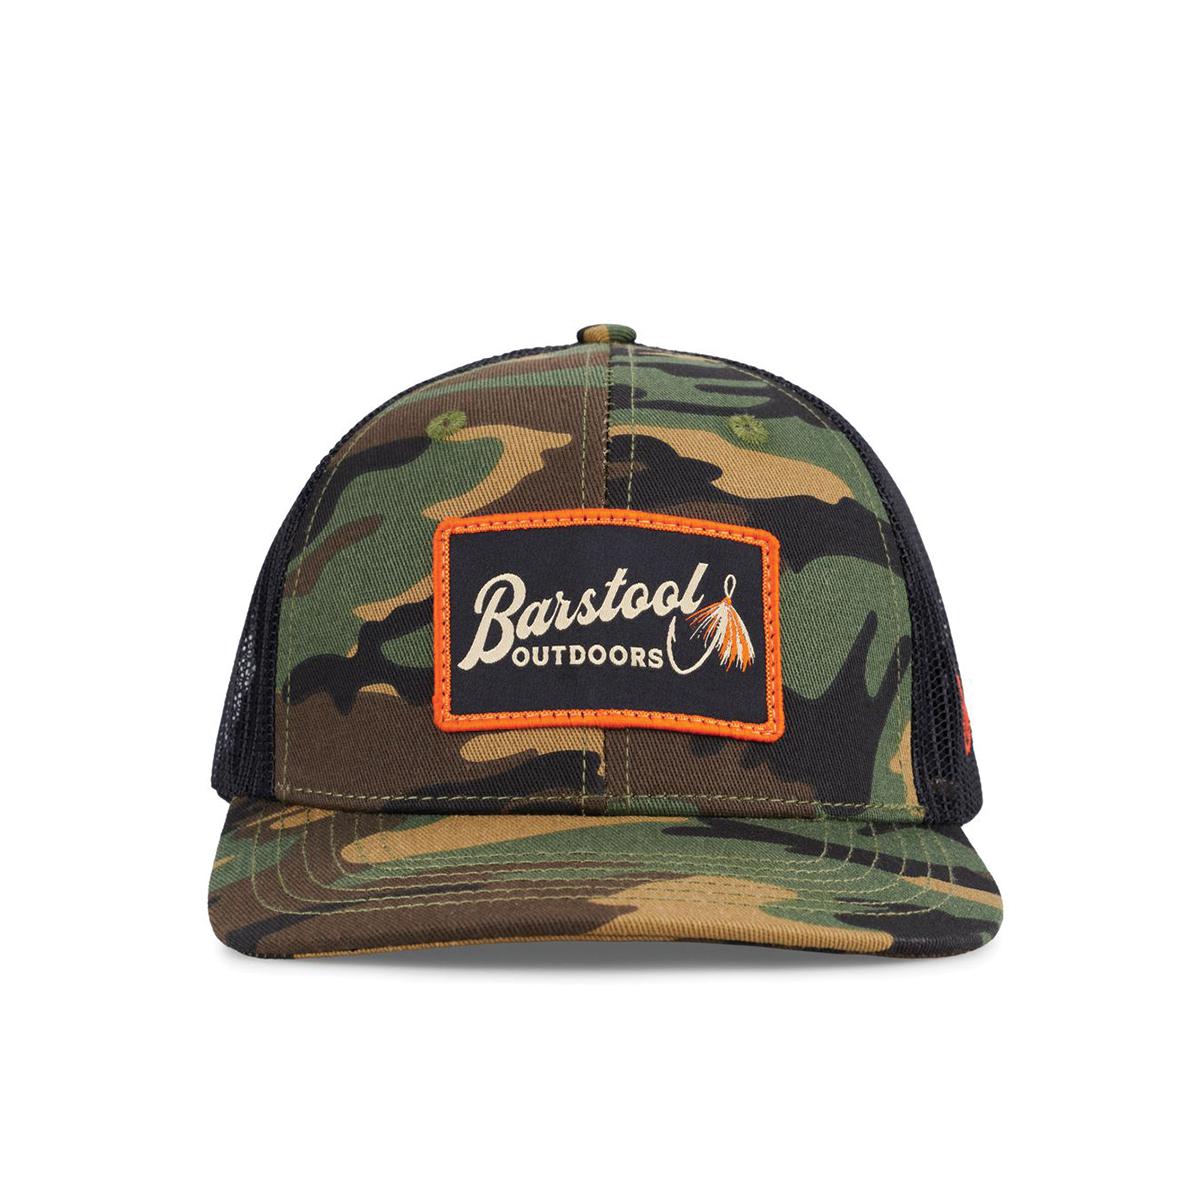 Barstool Outdoors Patch Trucker Hat-Hats-Barstool Outdoors-One Size-Camo-Barstool Sports